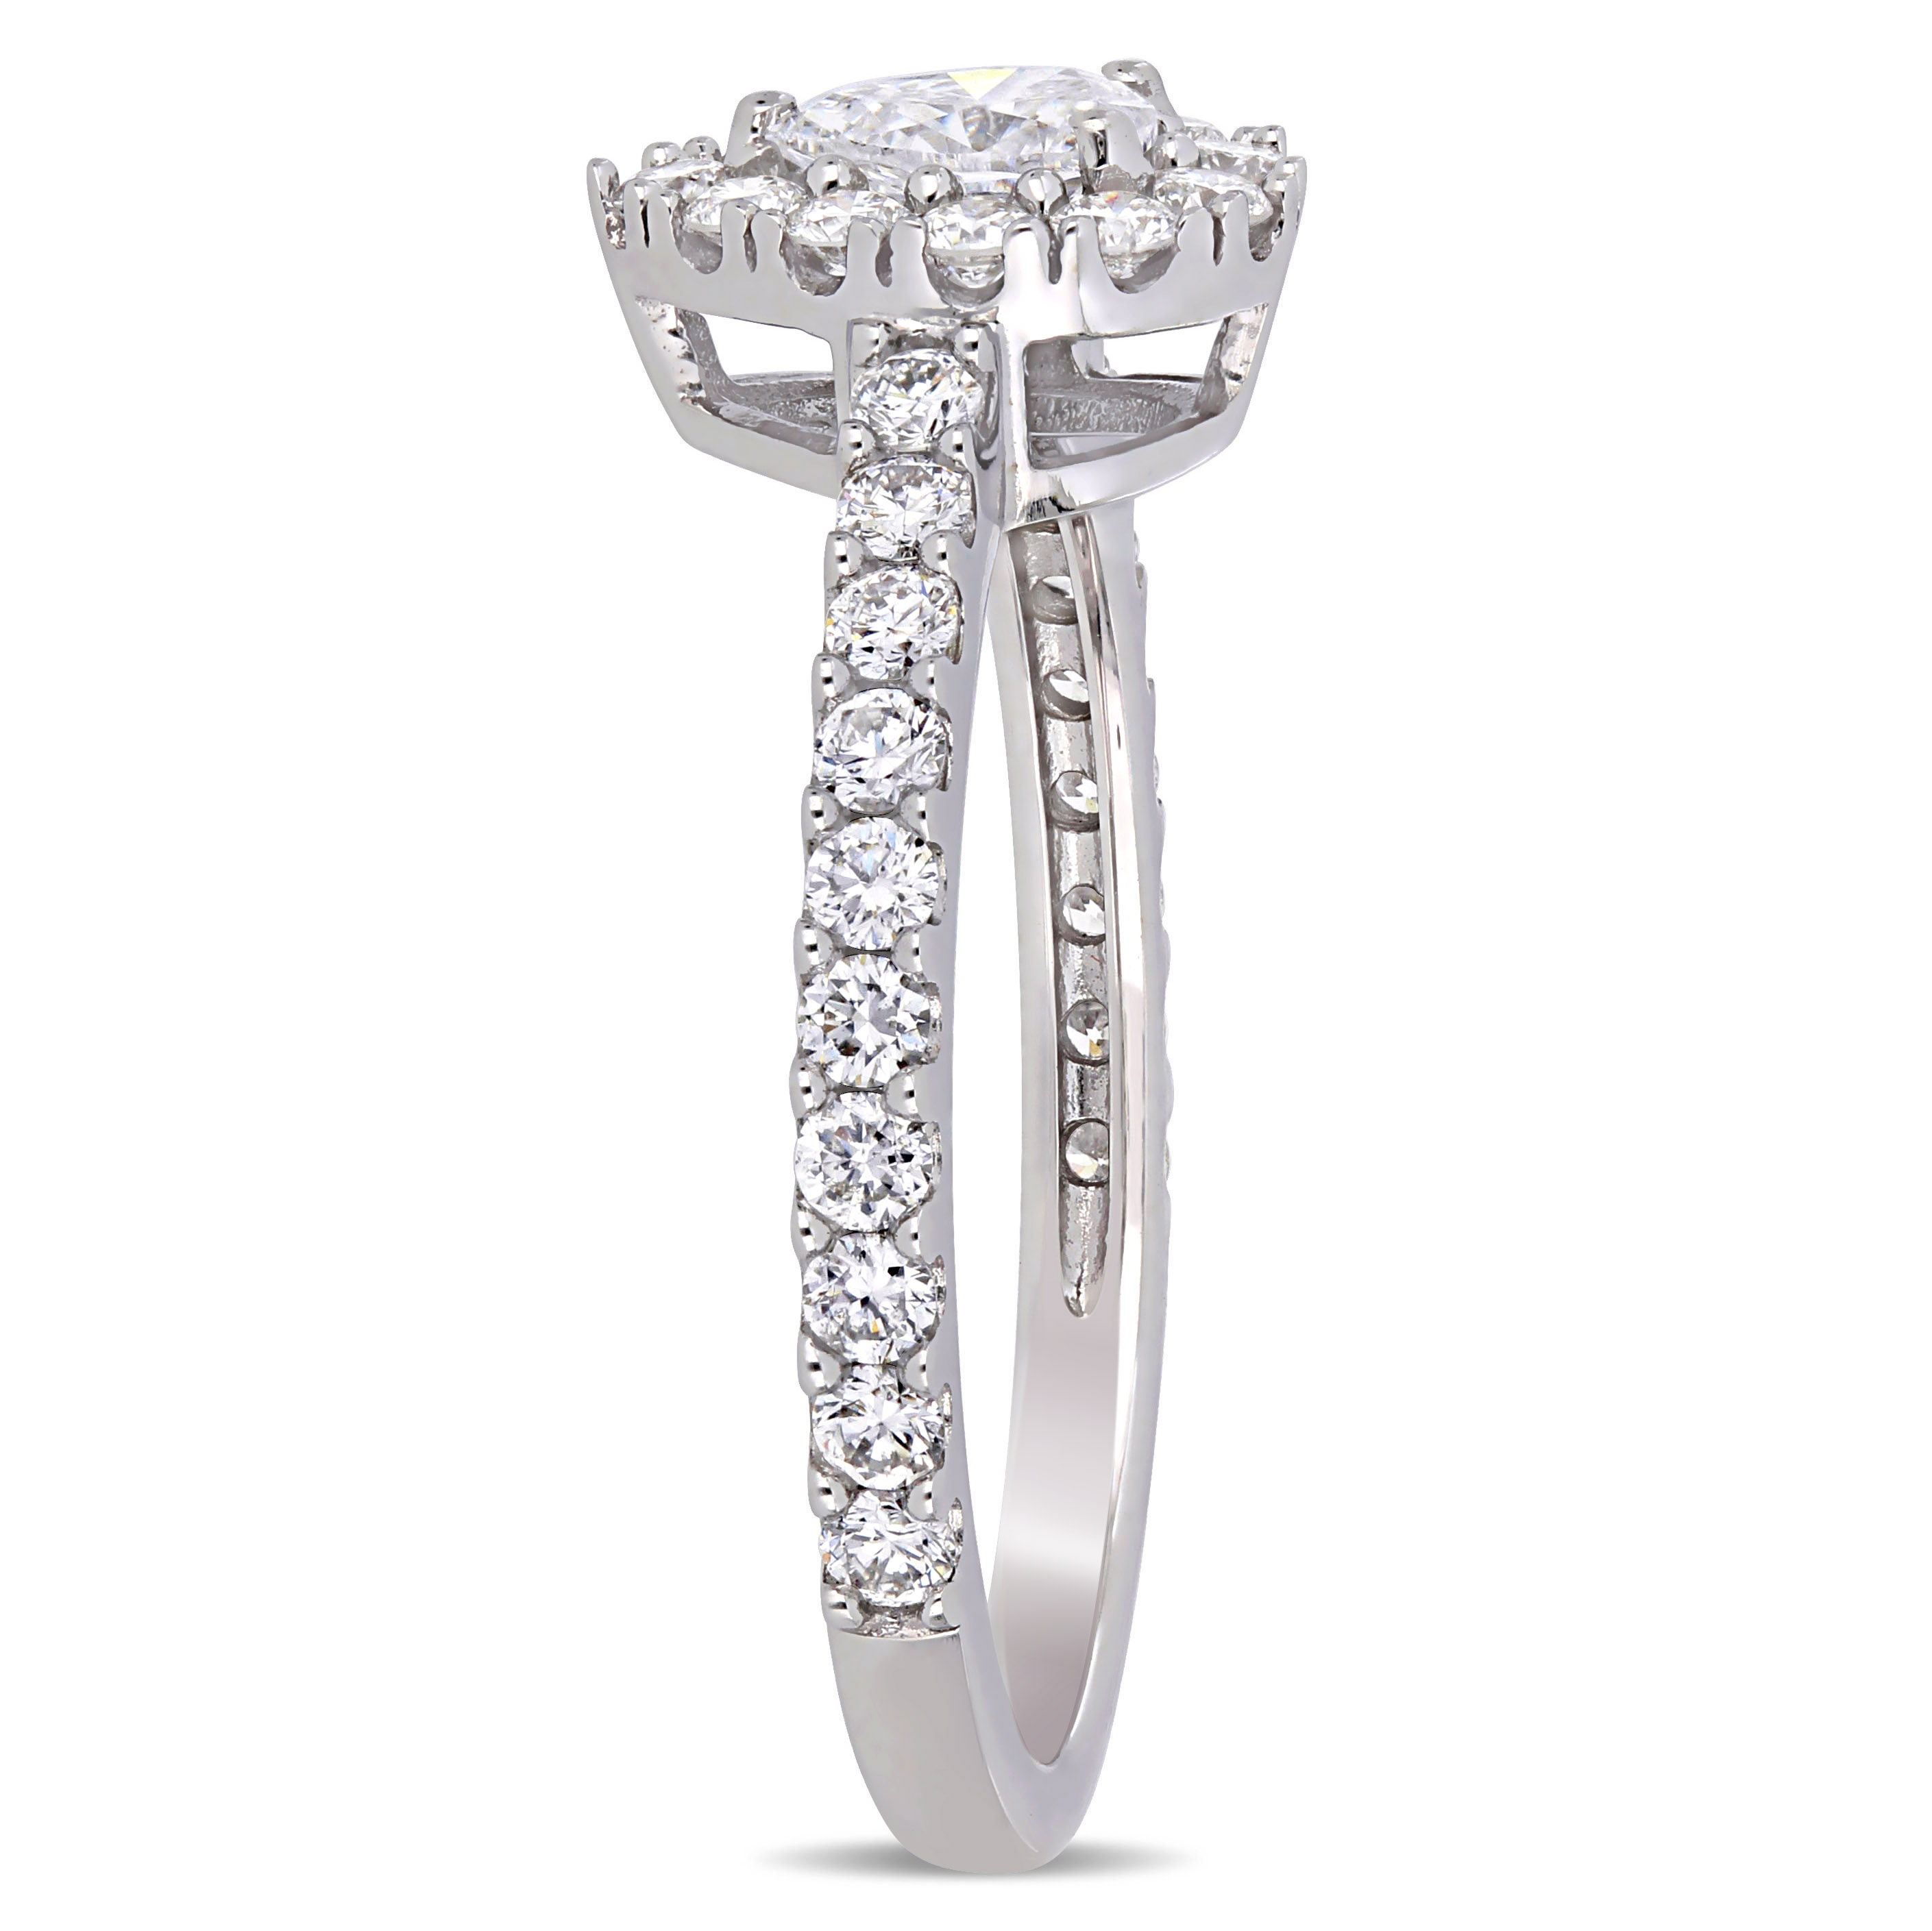 1 CT TW Pear-Cut Diamond Halo Engagement Ring in 14k White Gold